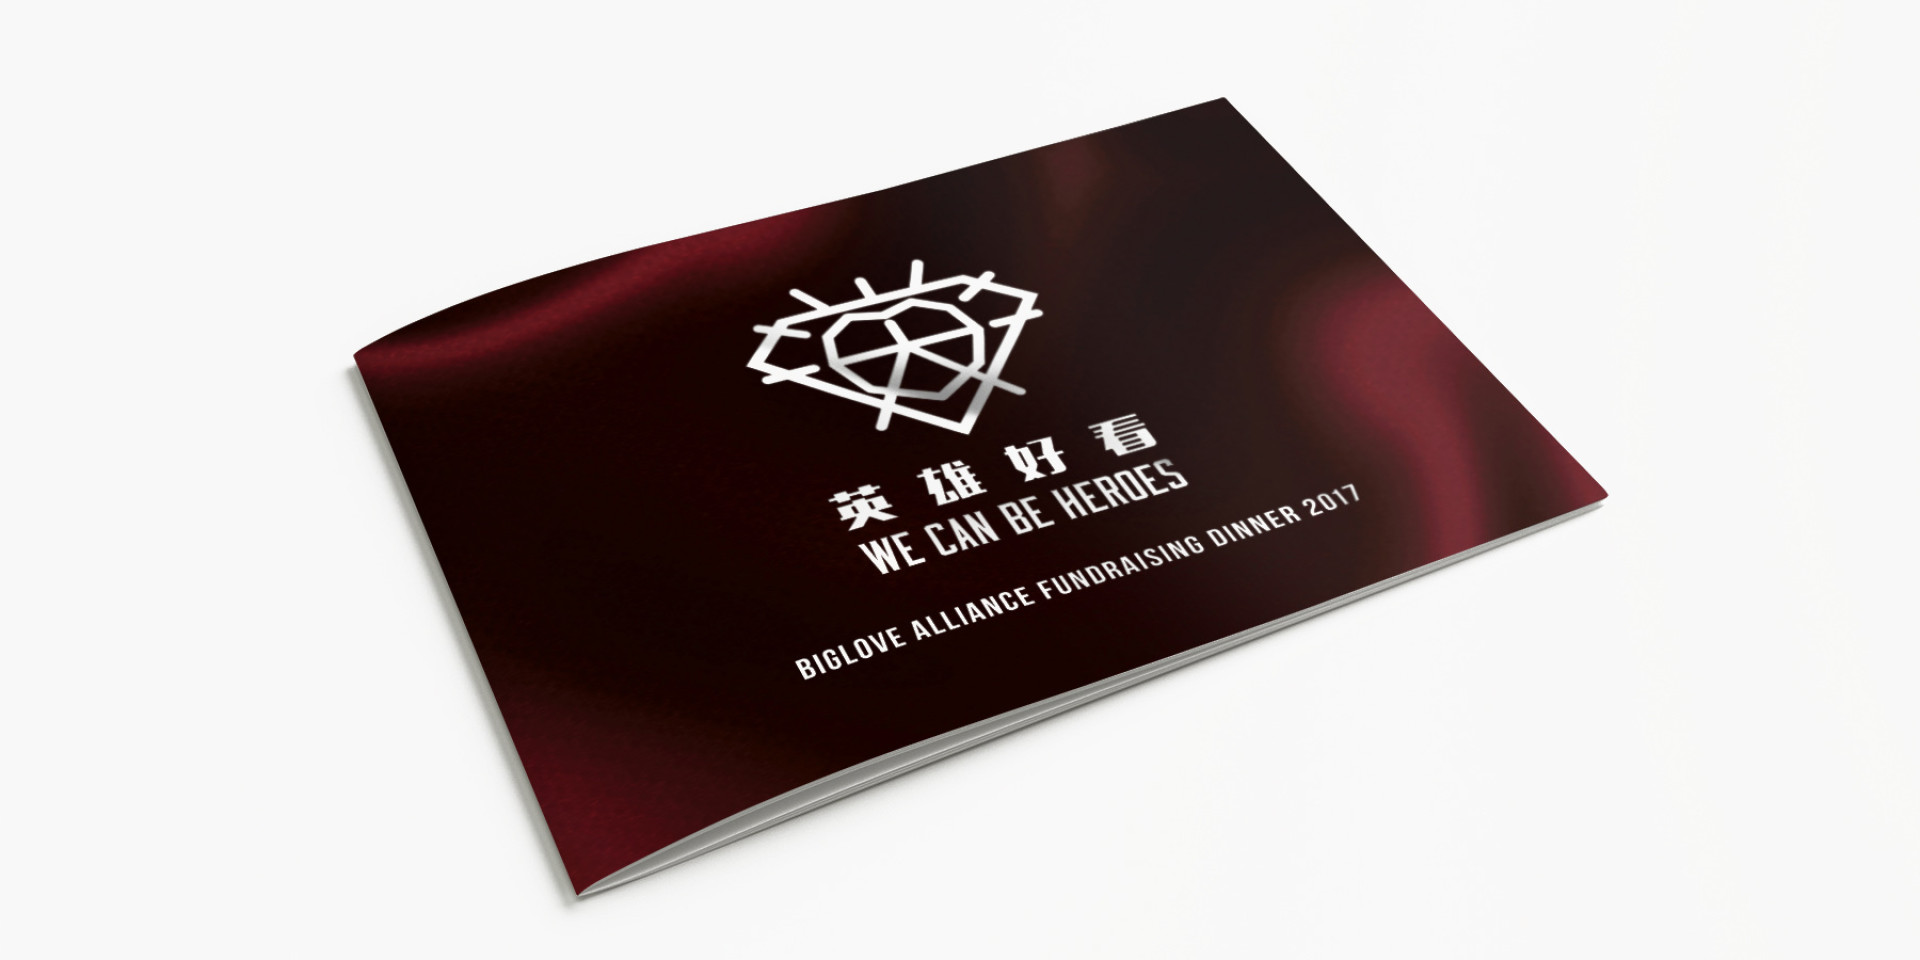 BigLove Alliance Hong Kong LGBT gala dinner event graphic, props, backdrop, auction booklet design and production